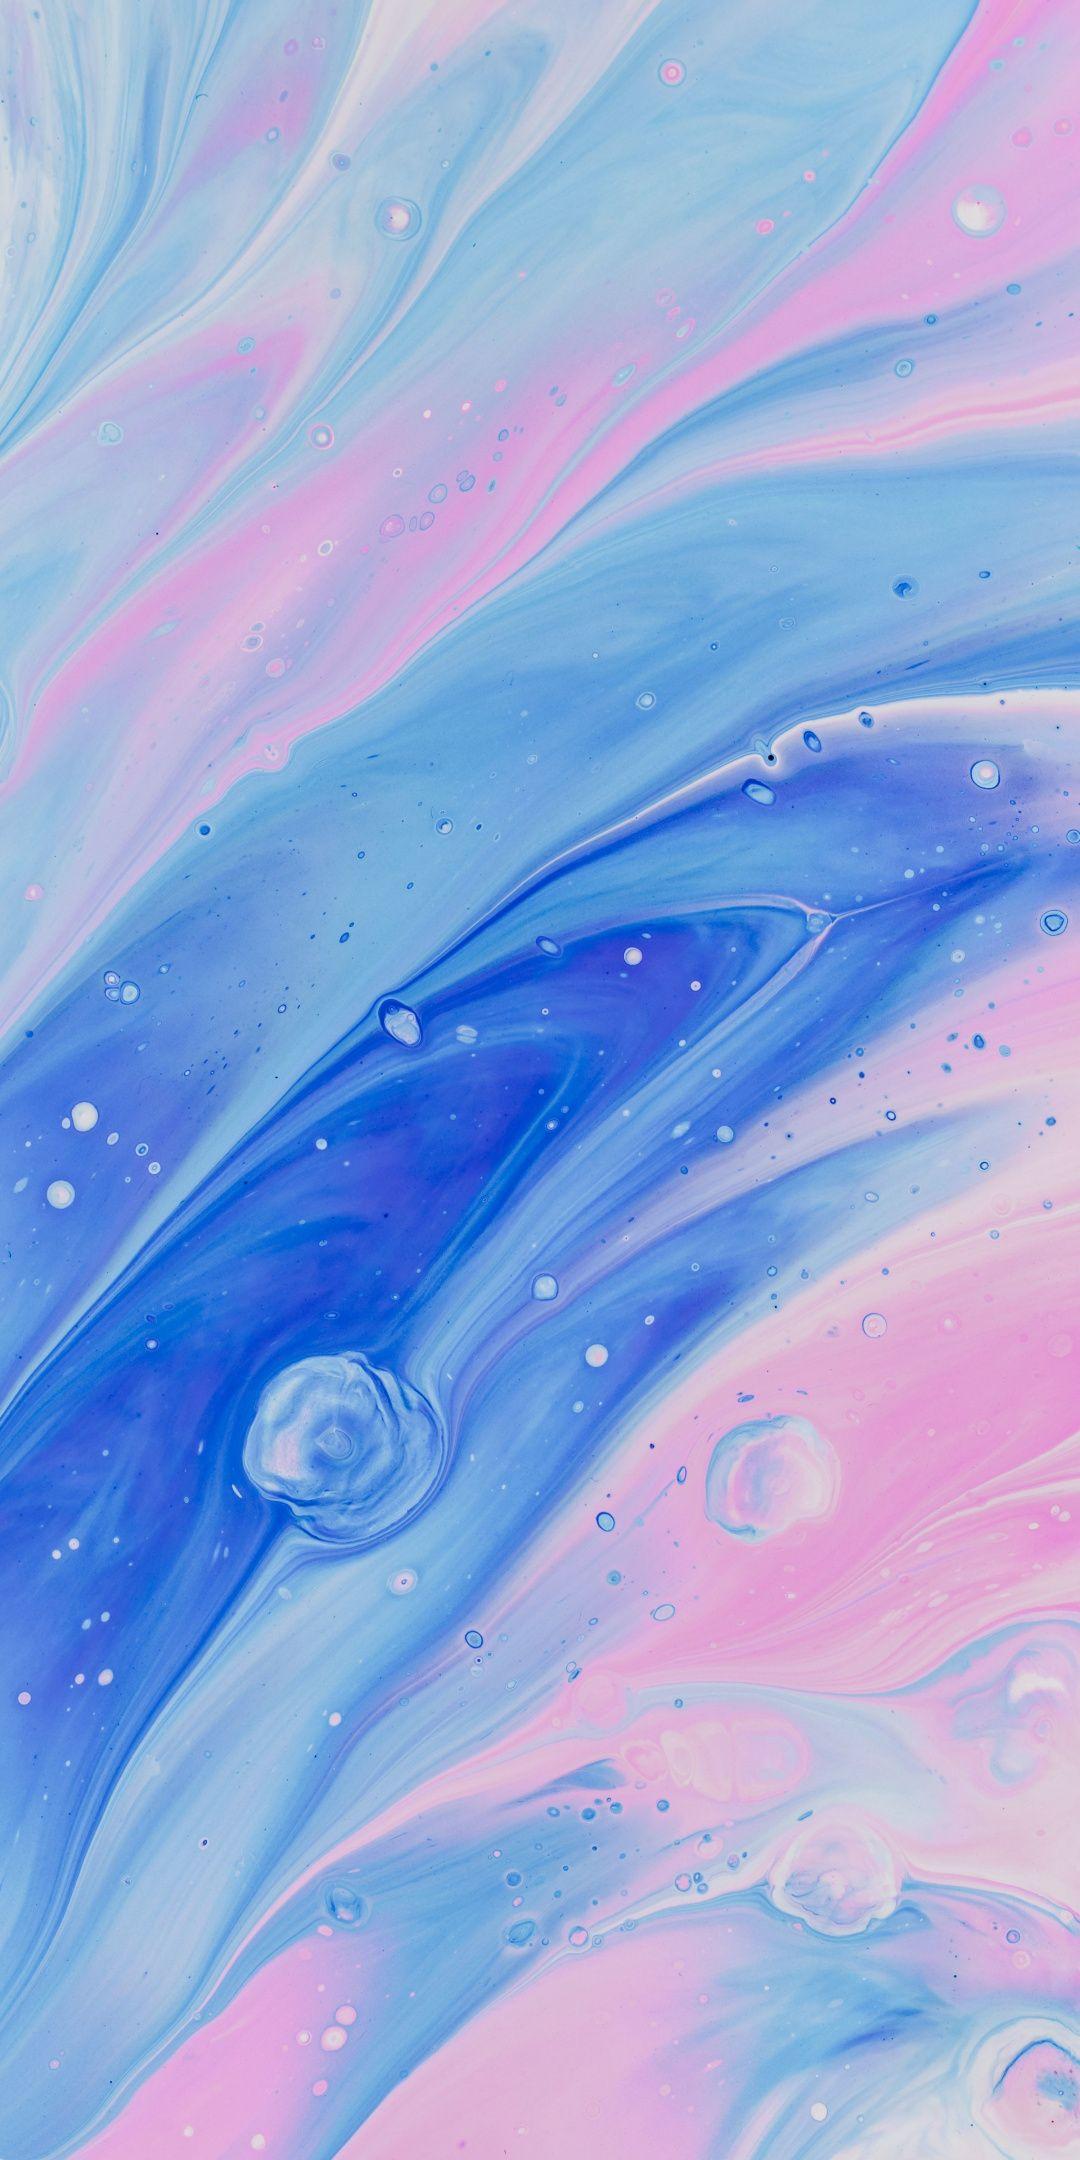 Download 1080x2160 Wallpaper Texture, Lines, Stains, Blue Pink